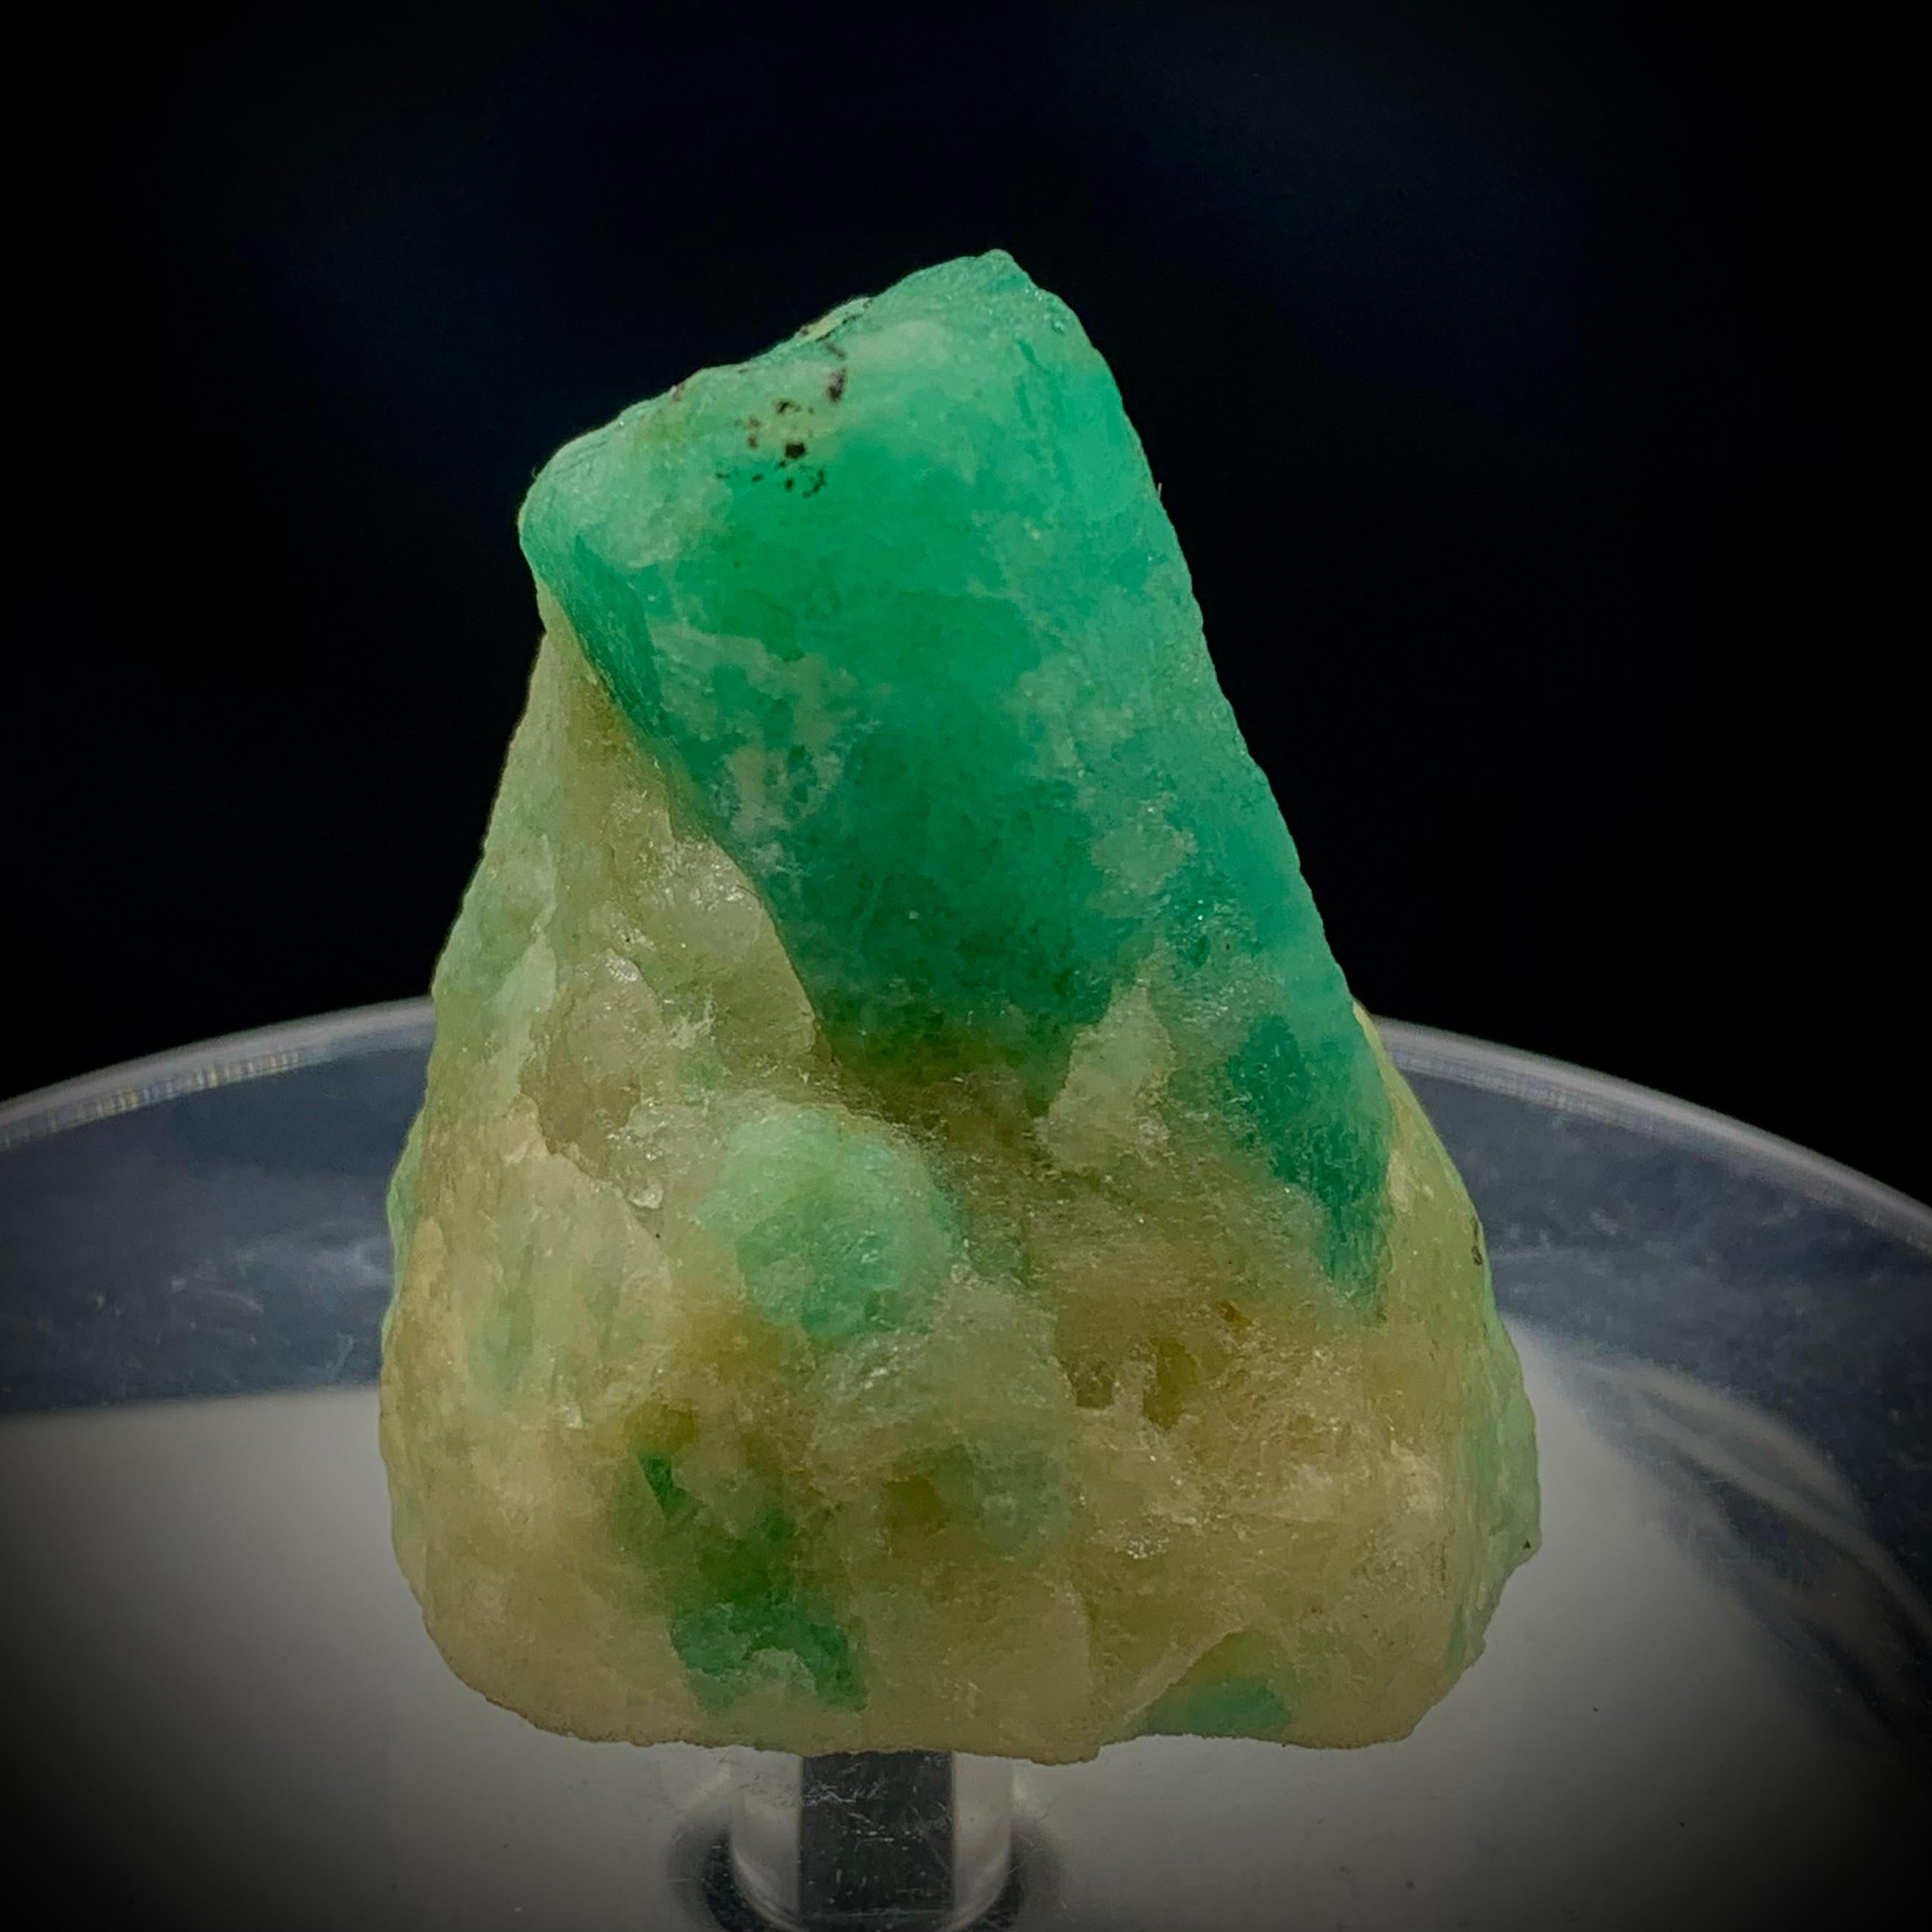 Vegetable Dyed Gorgeous 44 Gram Natural Emerald Specimen with Calcite Matrix from Pakistan Mine